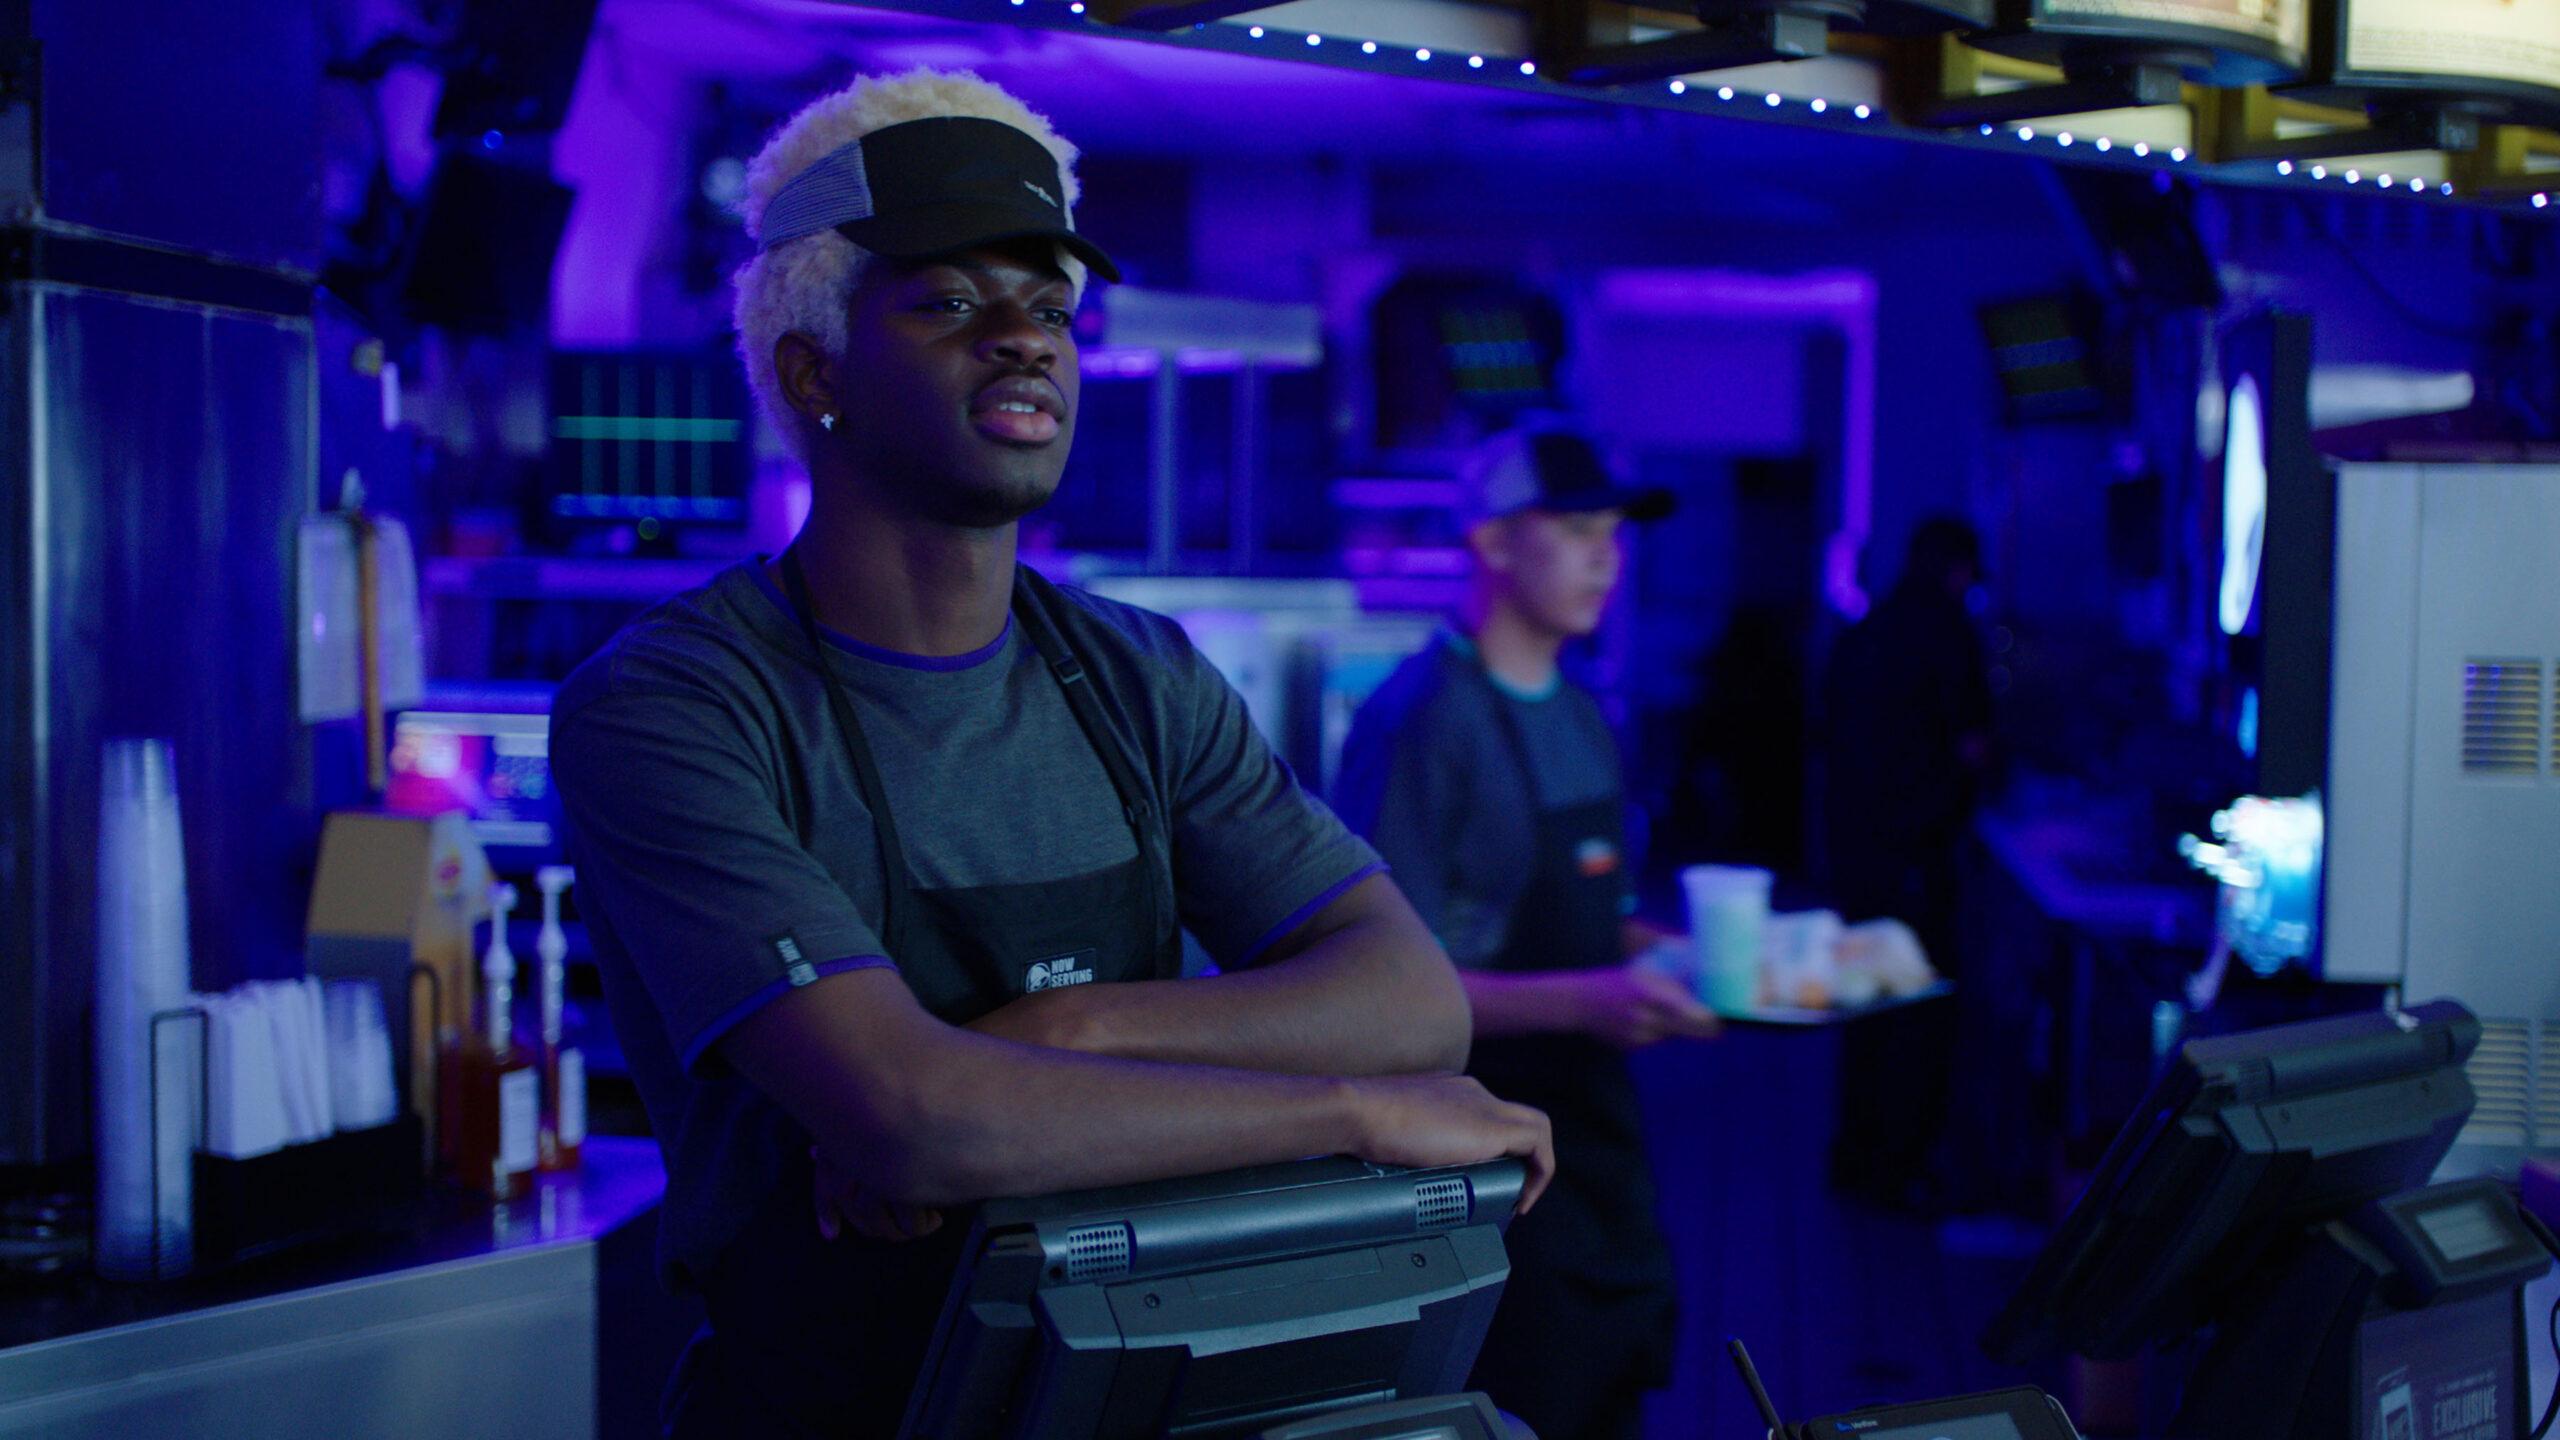 Lil Nas X goes back to working in Taco Bell - but this time he is Chief Impact Officer and starring in a new ad campaign